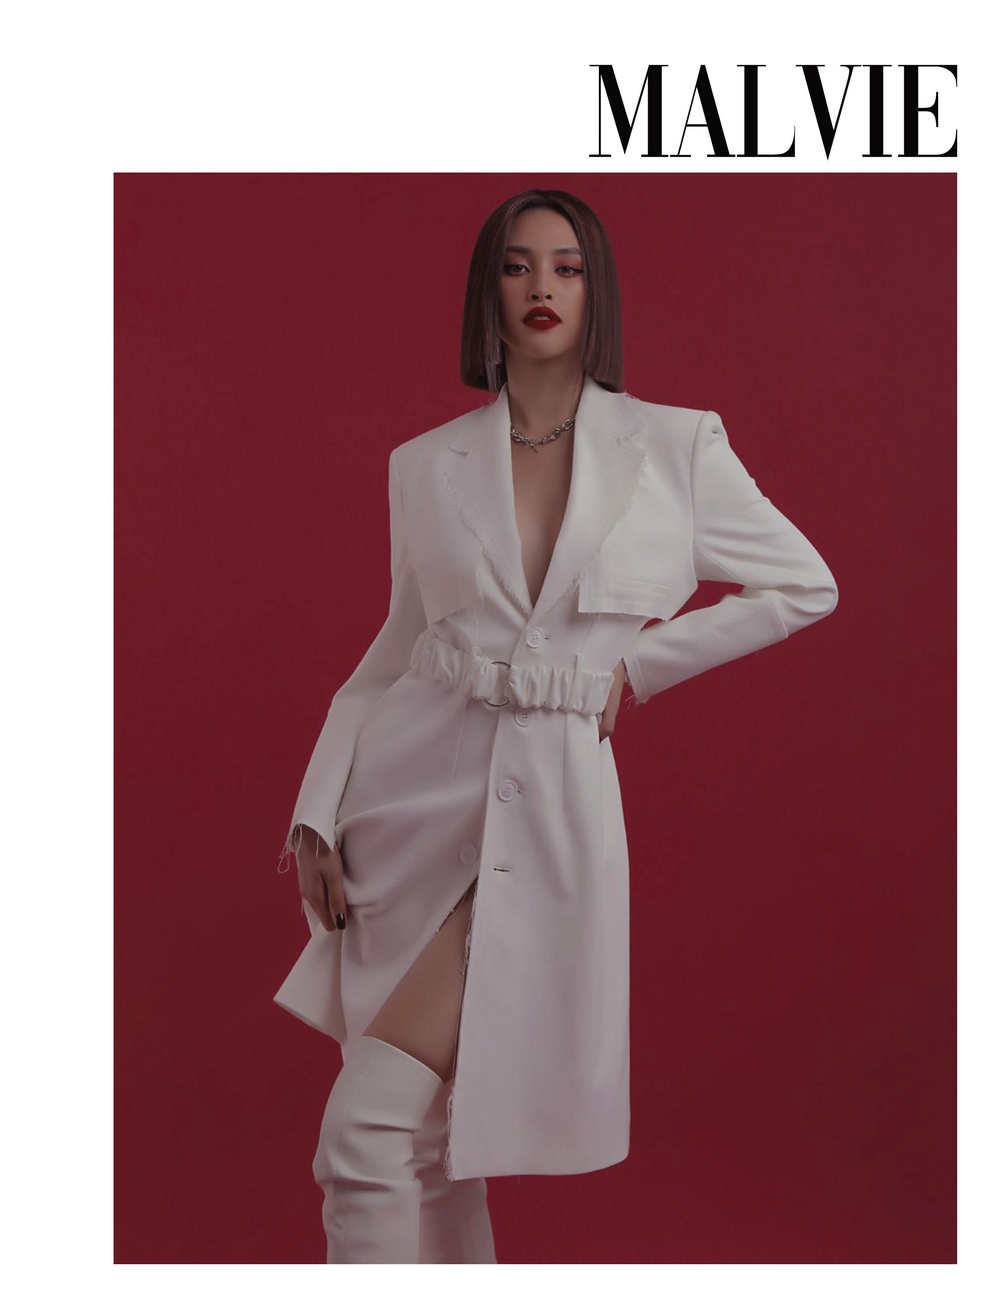 tieu vy makes debut in french fashion magazine picture 10